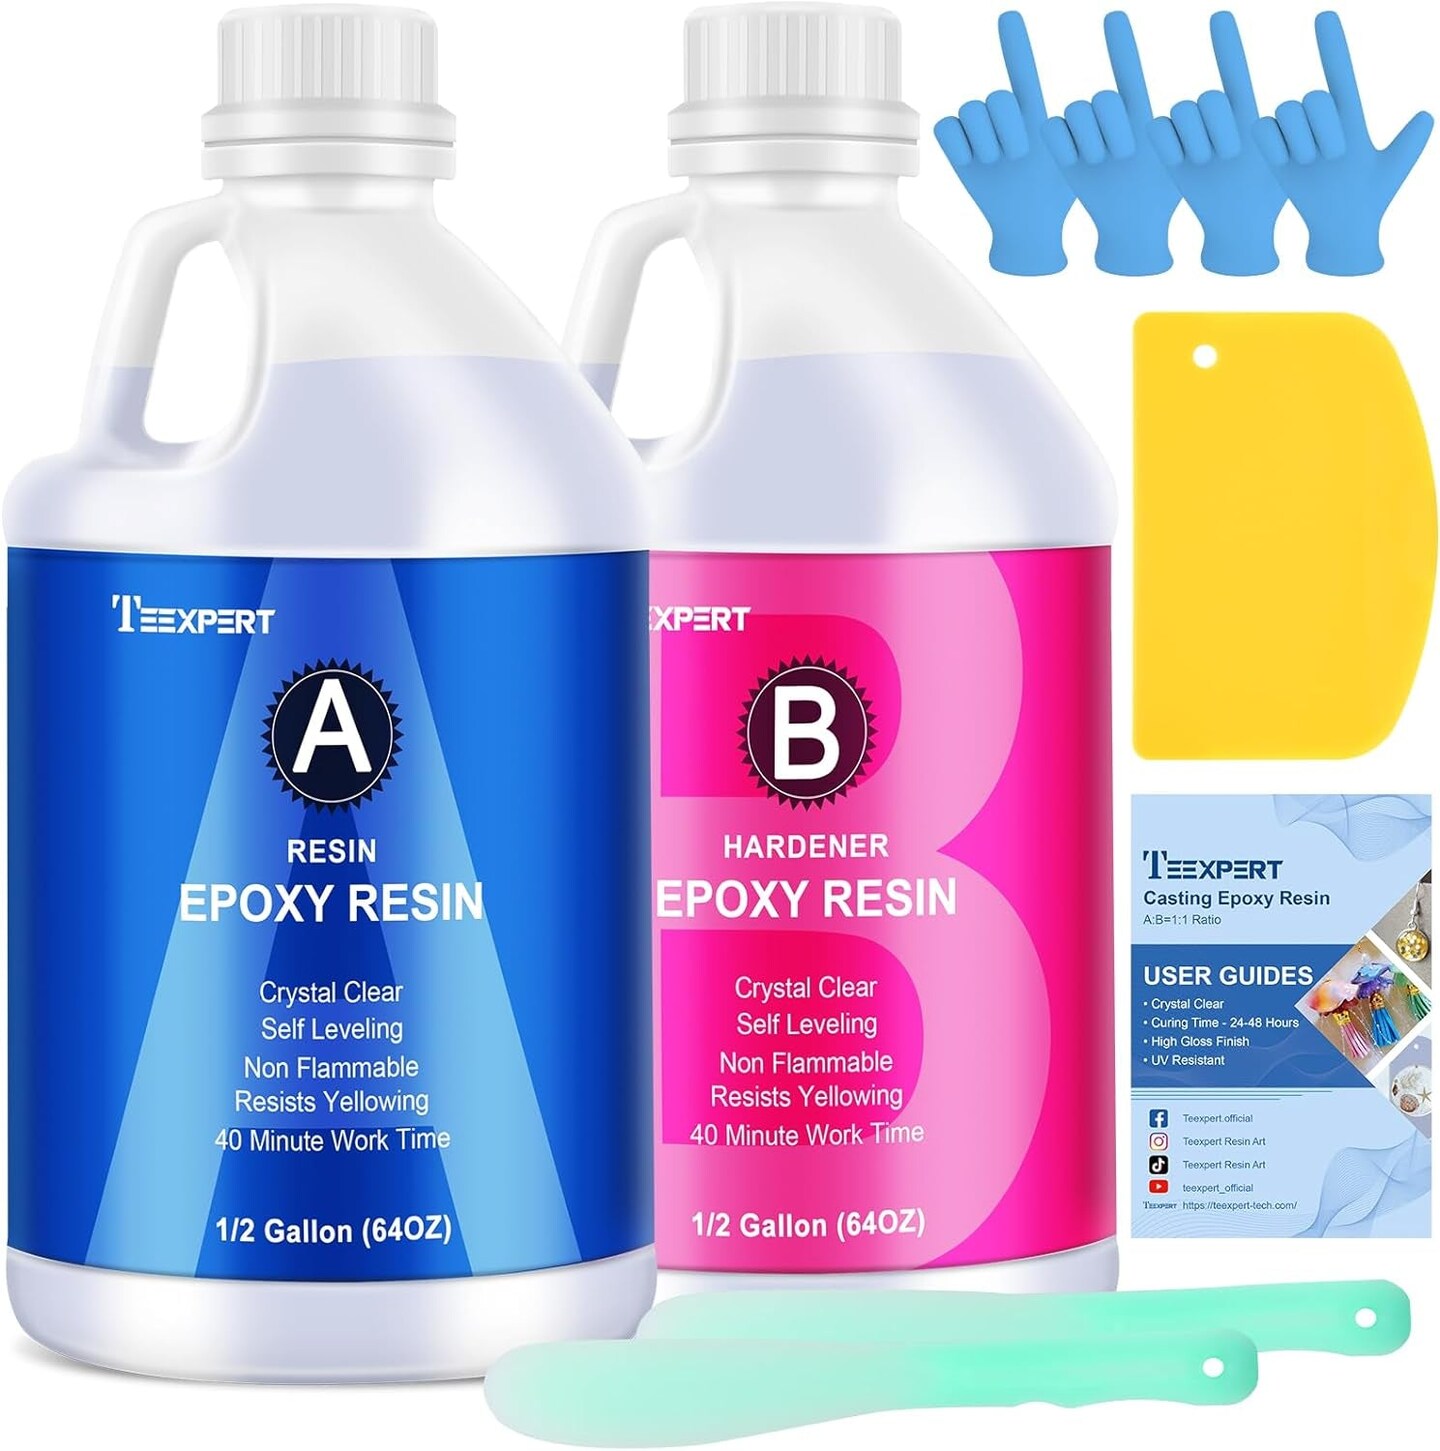 Teexpert Crystal Clear Epoxy Resin Kit 2 Gallon Self-Leveling Coating and  Casting Resin, High-Gloss & Bubbles Free Resin and Hardener Kit for DIY  Art